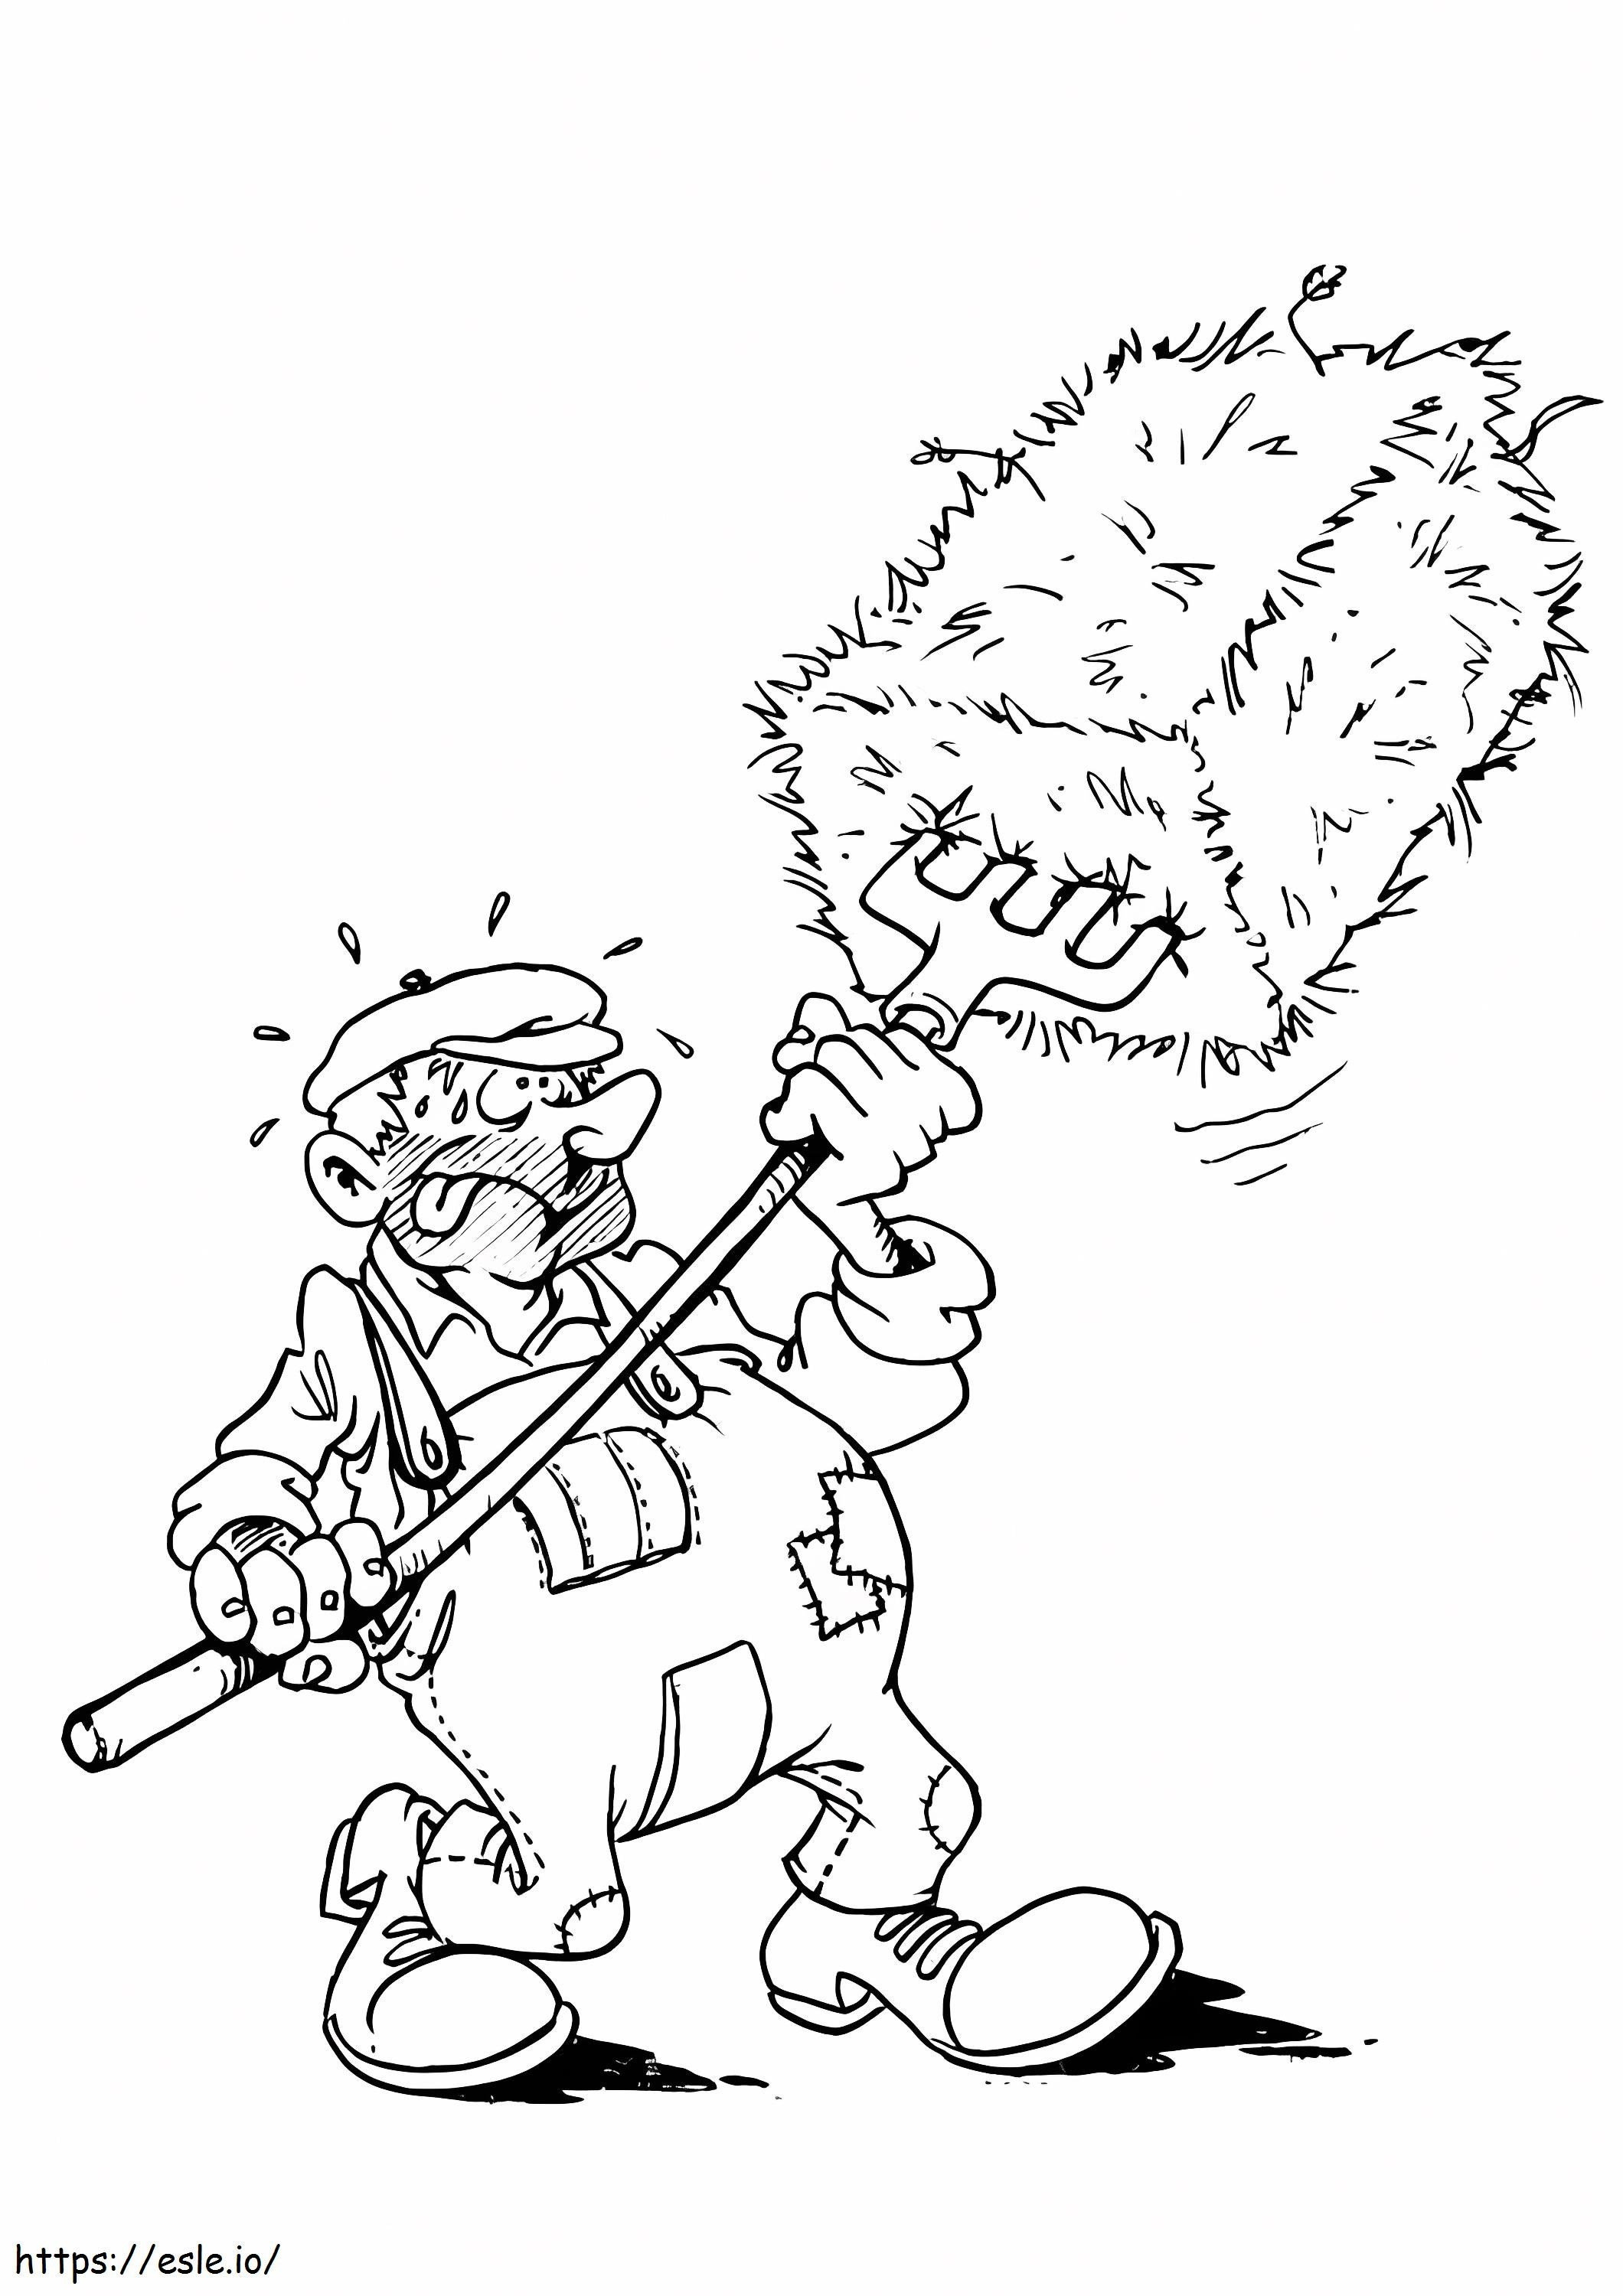 Funny Farmer coloring page